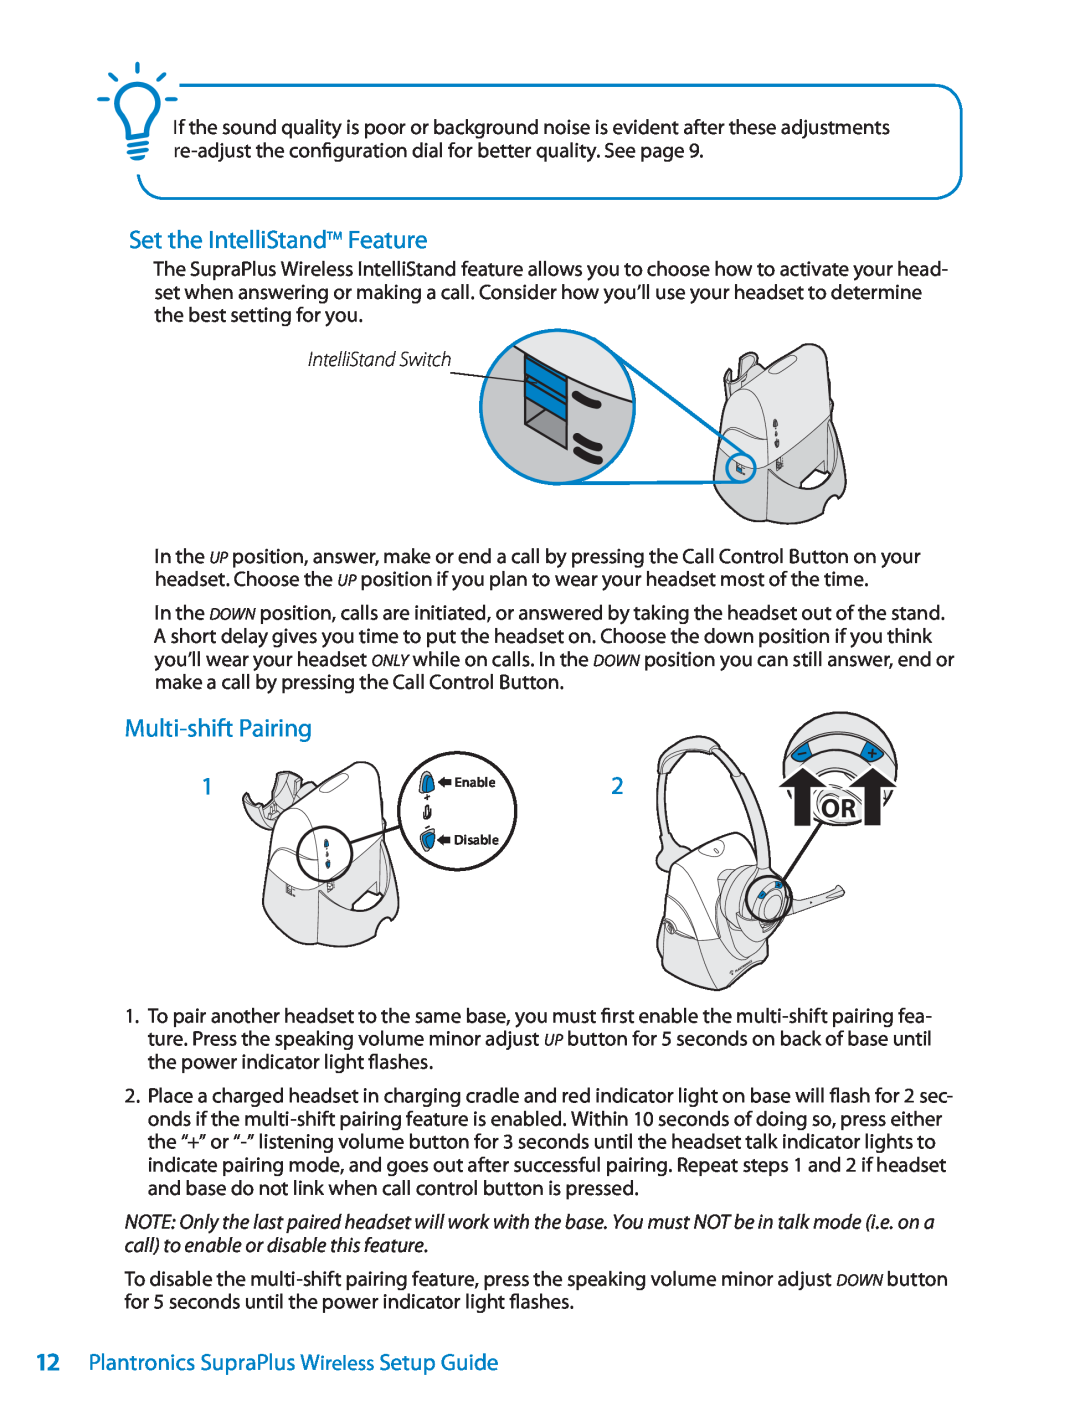 Univex Wireless Headset System setup guide Set the IntelliStandTM Feature, Multi-shiftPairing, IntelliStand Switch 